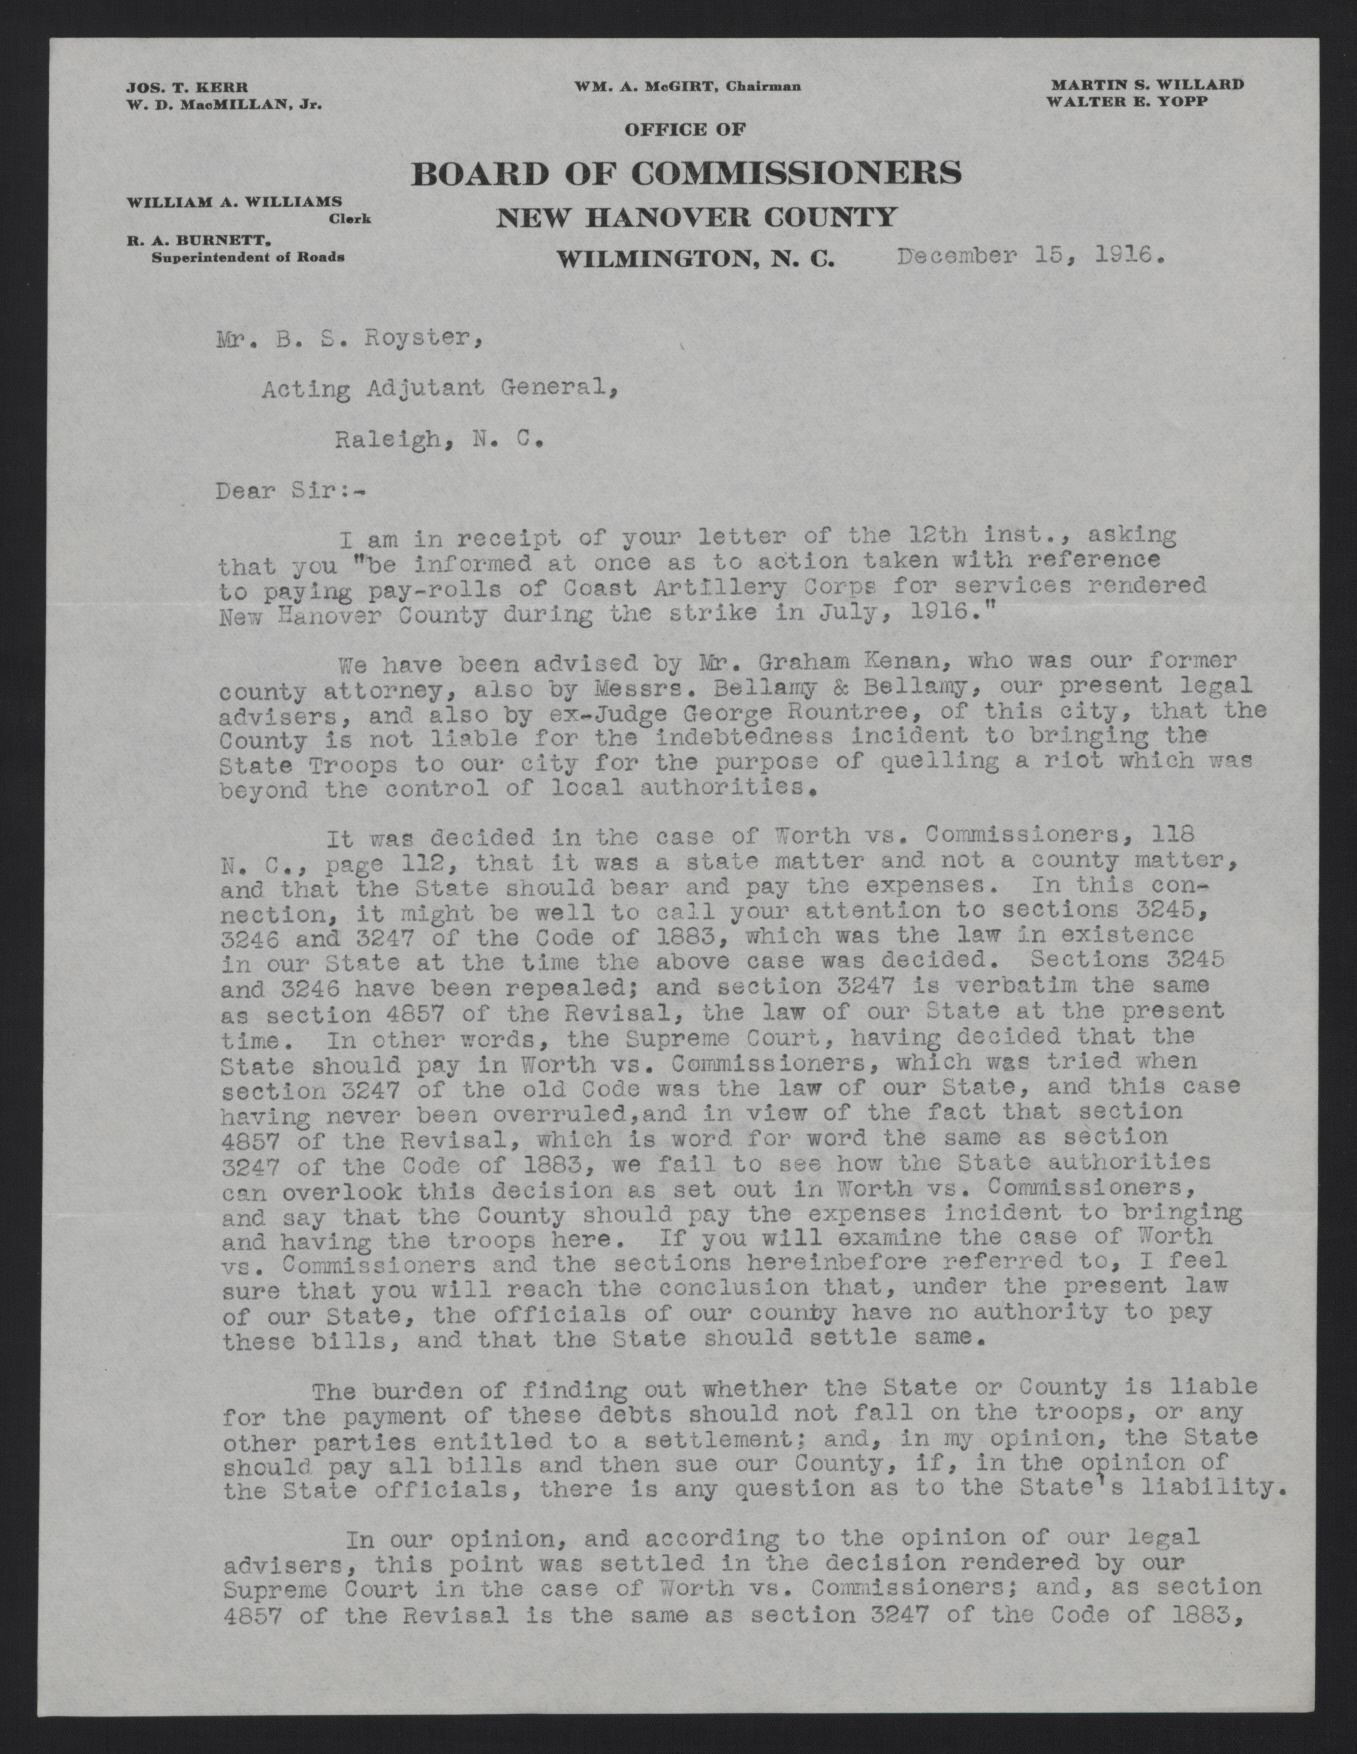 Letter from McGirt to Royster, December 15, 1916, page 1